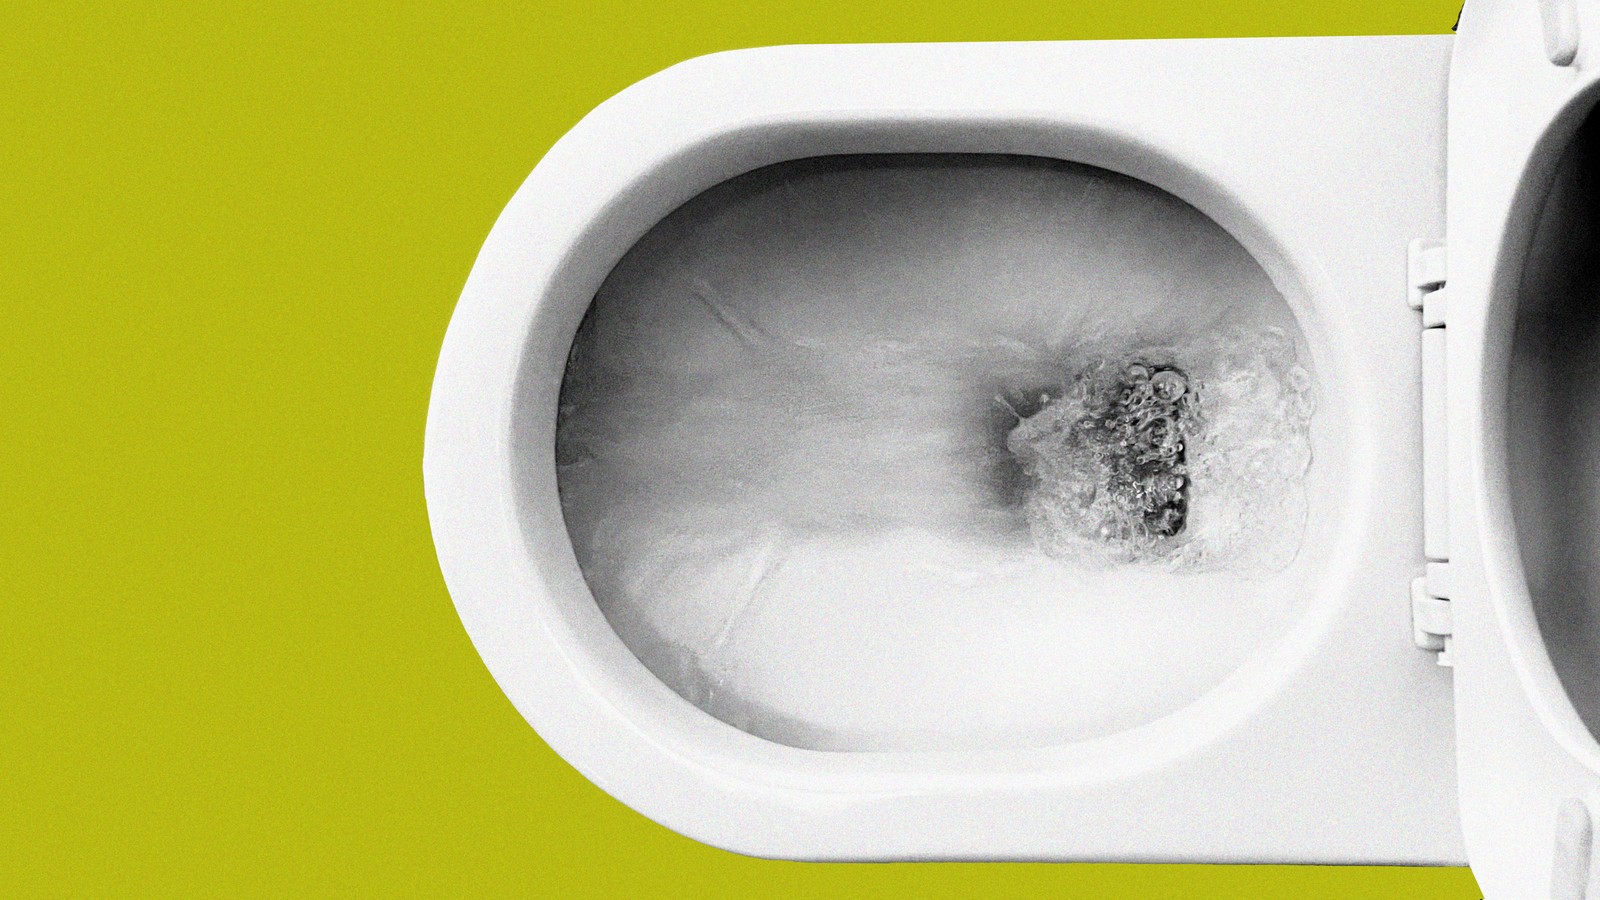 Flushed away: Images show bacteria propelled from toilets when